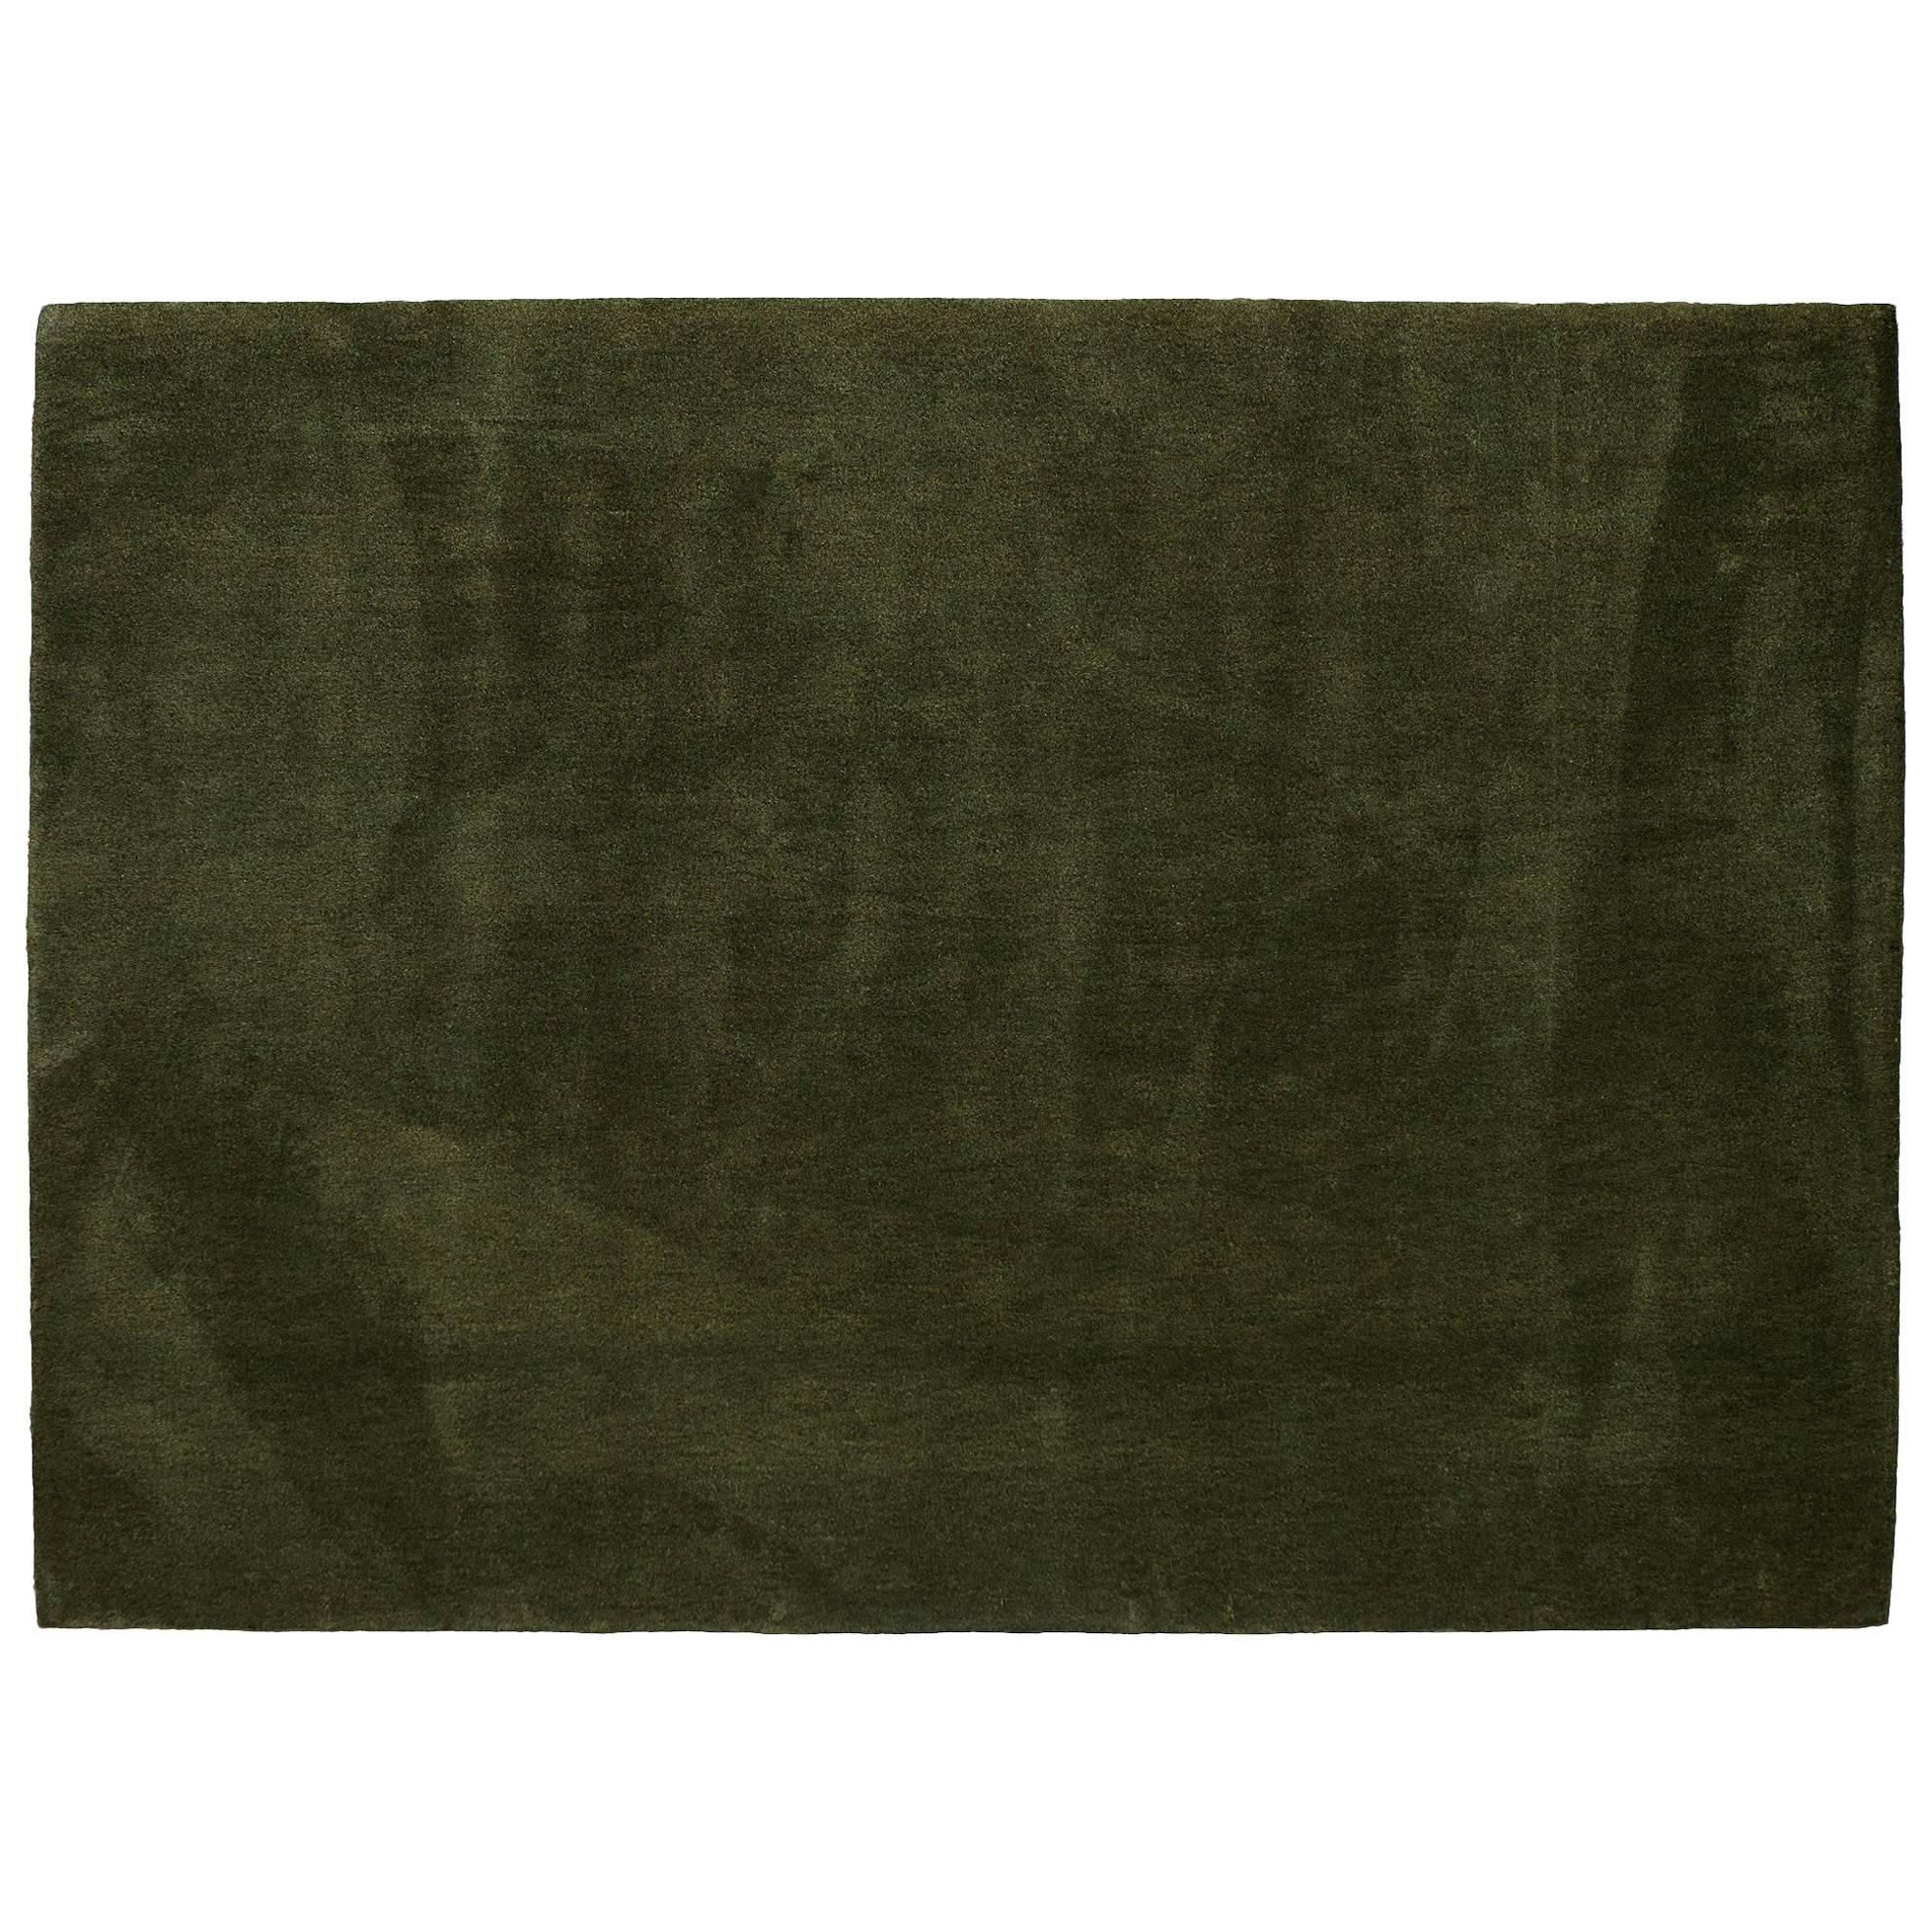 'Vert Pinton' Hand-Tufted Area Rug in Olive Green by Pinton